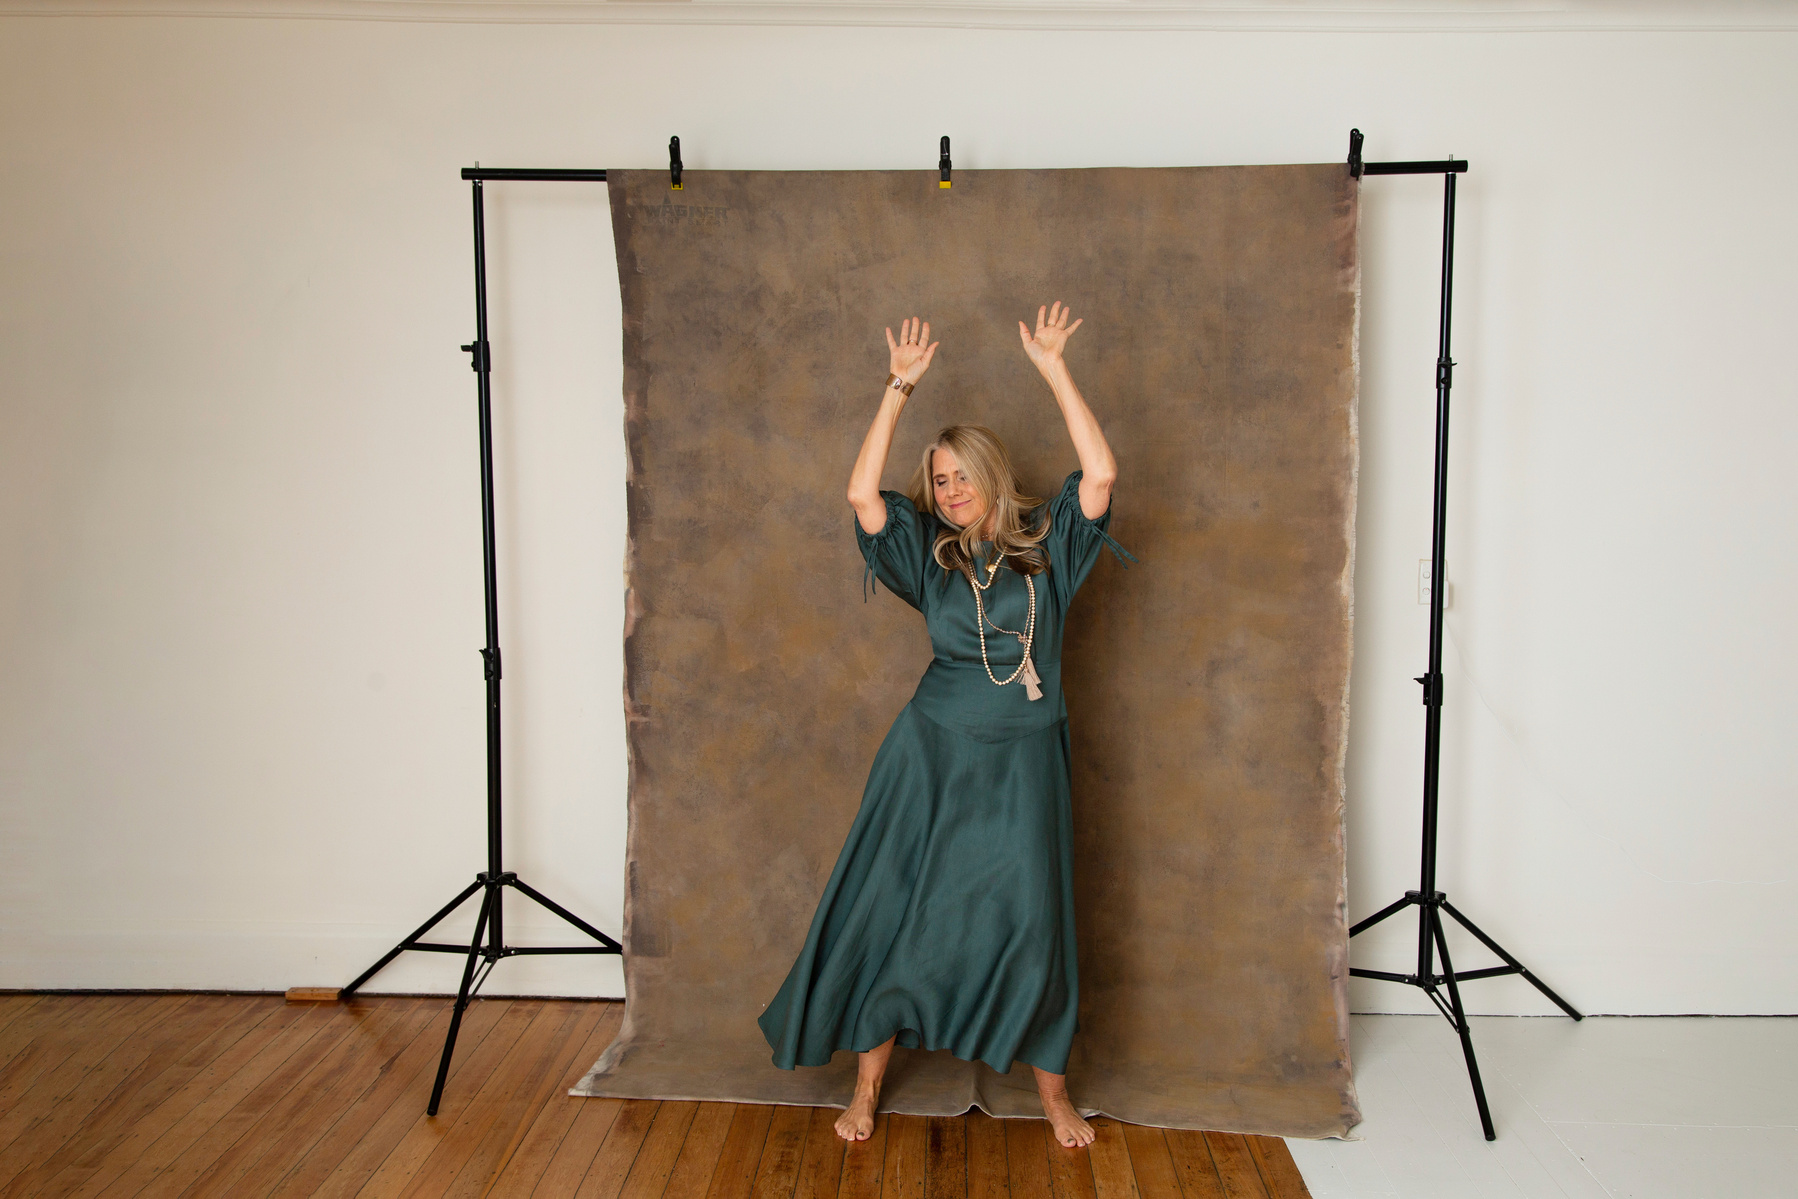 A slim blonde woman dances in front of a photography backdrop